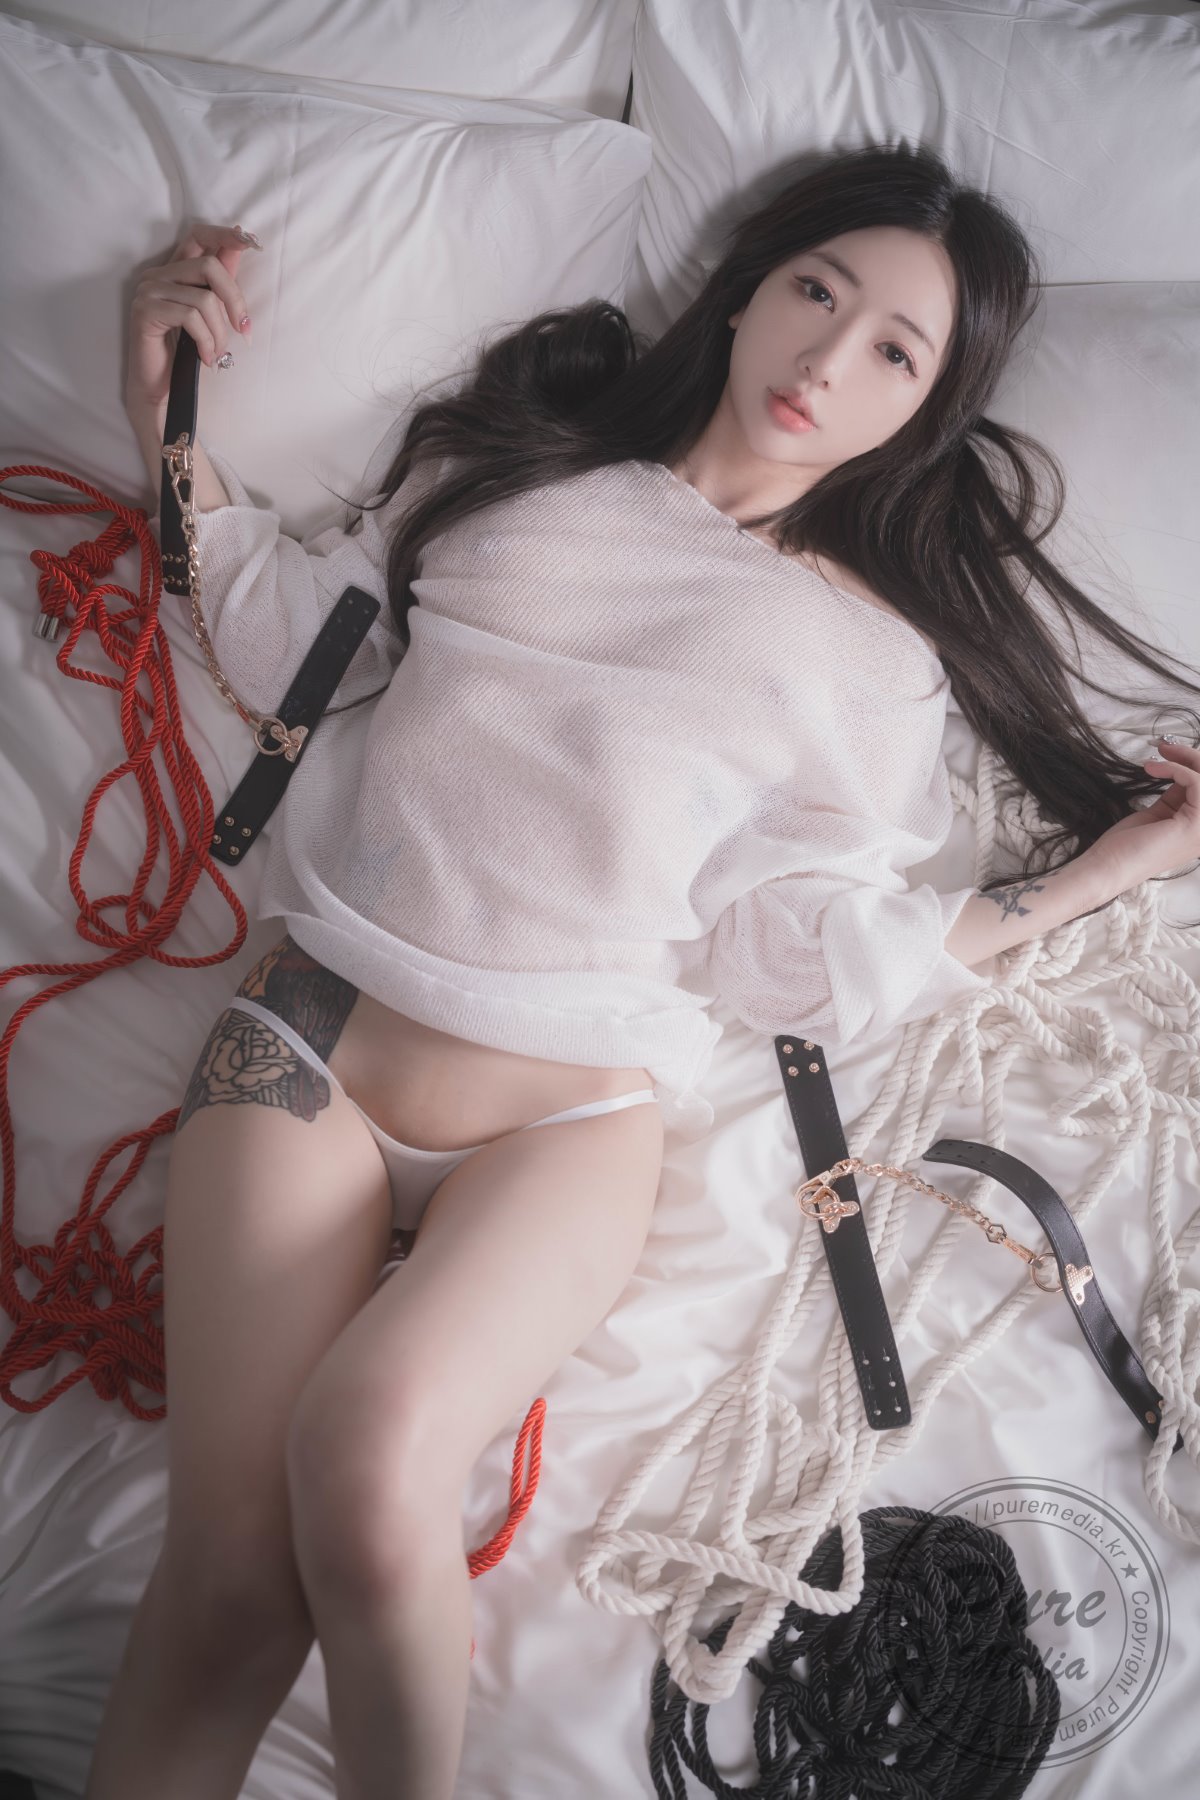 PureMedia Vol 283 Jia 지아 Tie Me Up With A Rope Part2 0024 6283186829.jpg